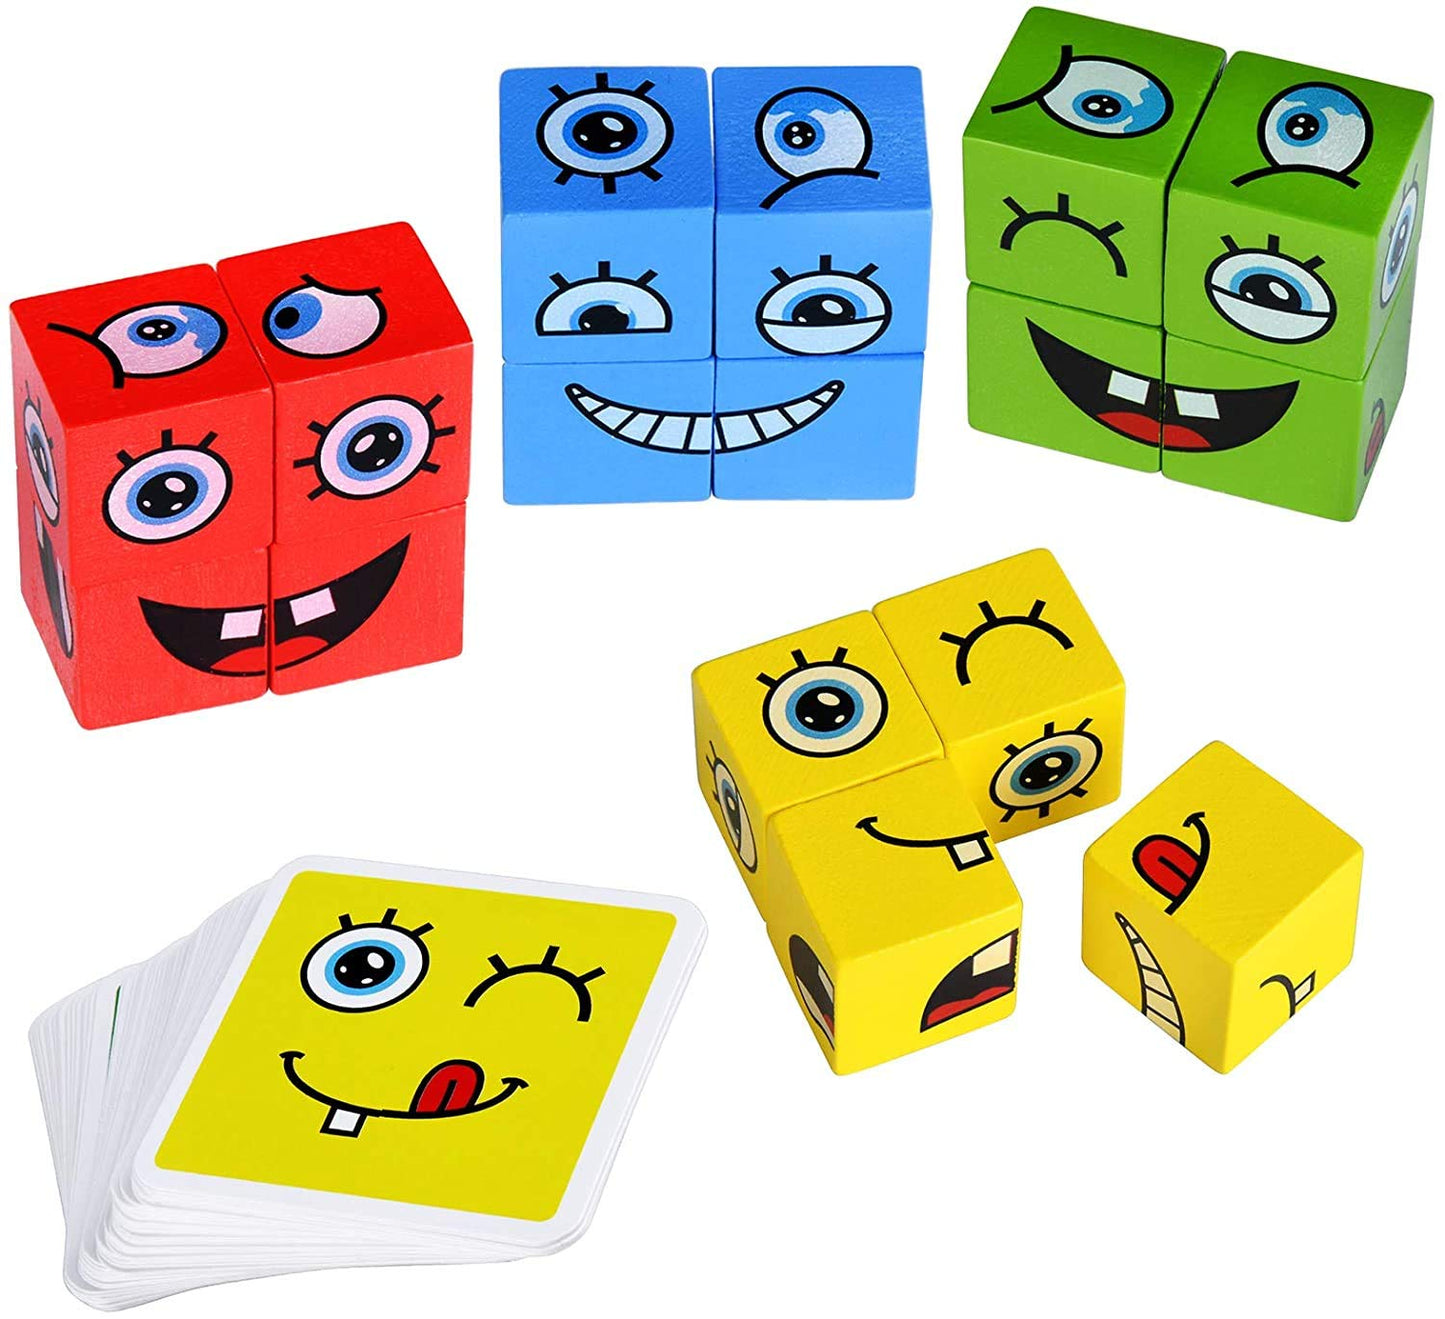 Baybee Wooden 3D Expression Puzzle Building Blocks for Kids